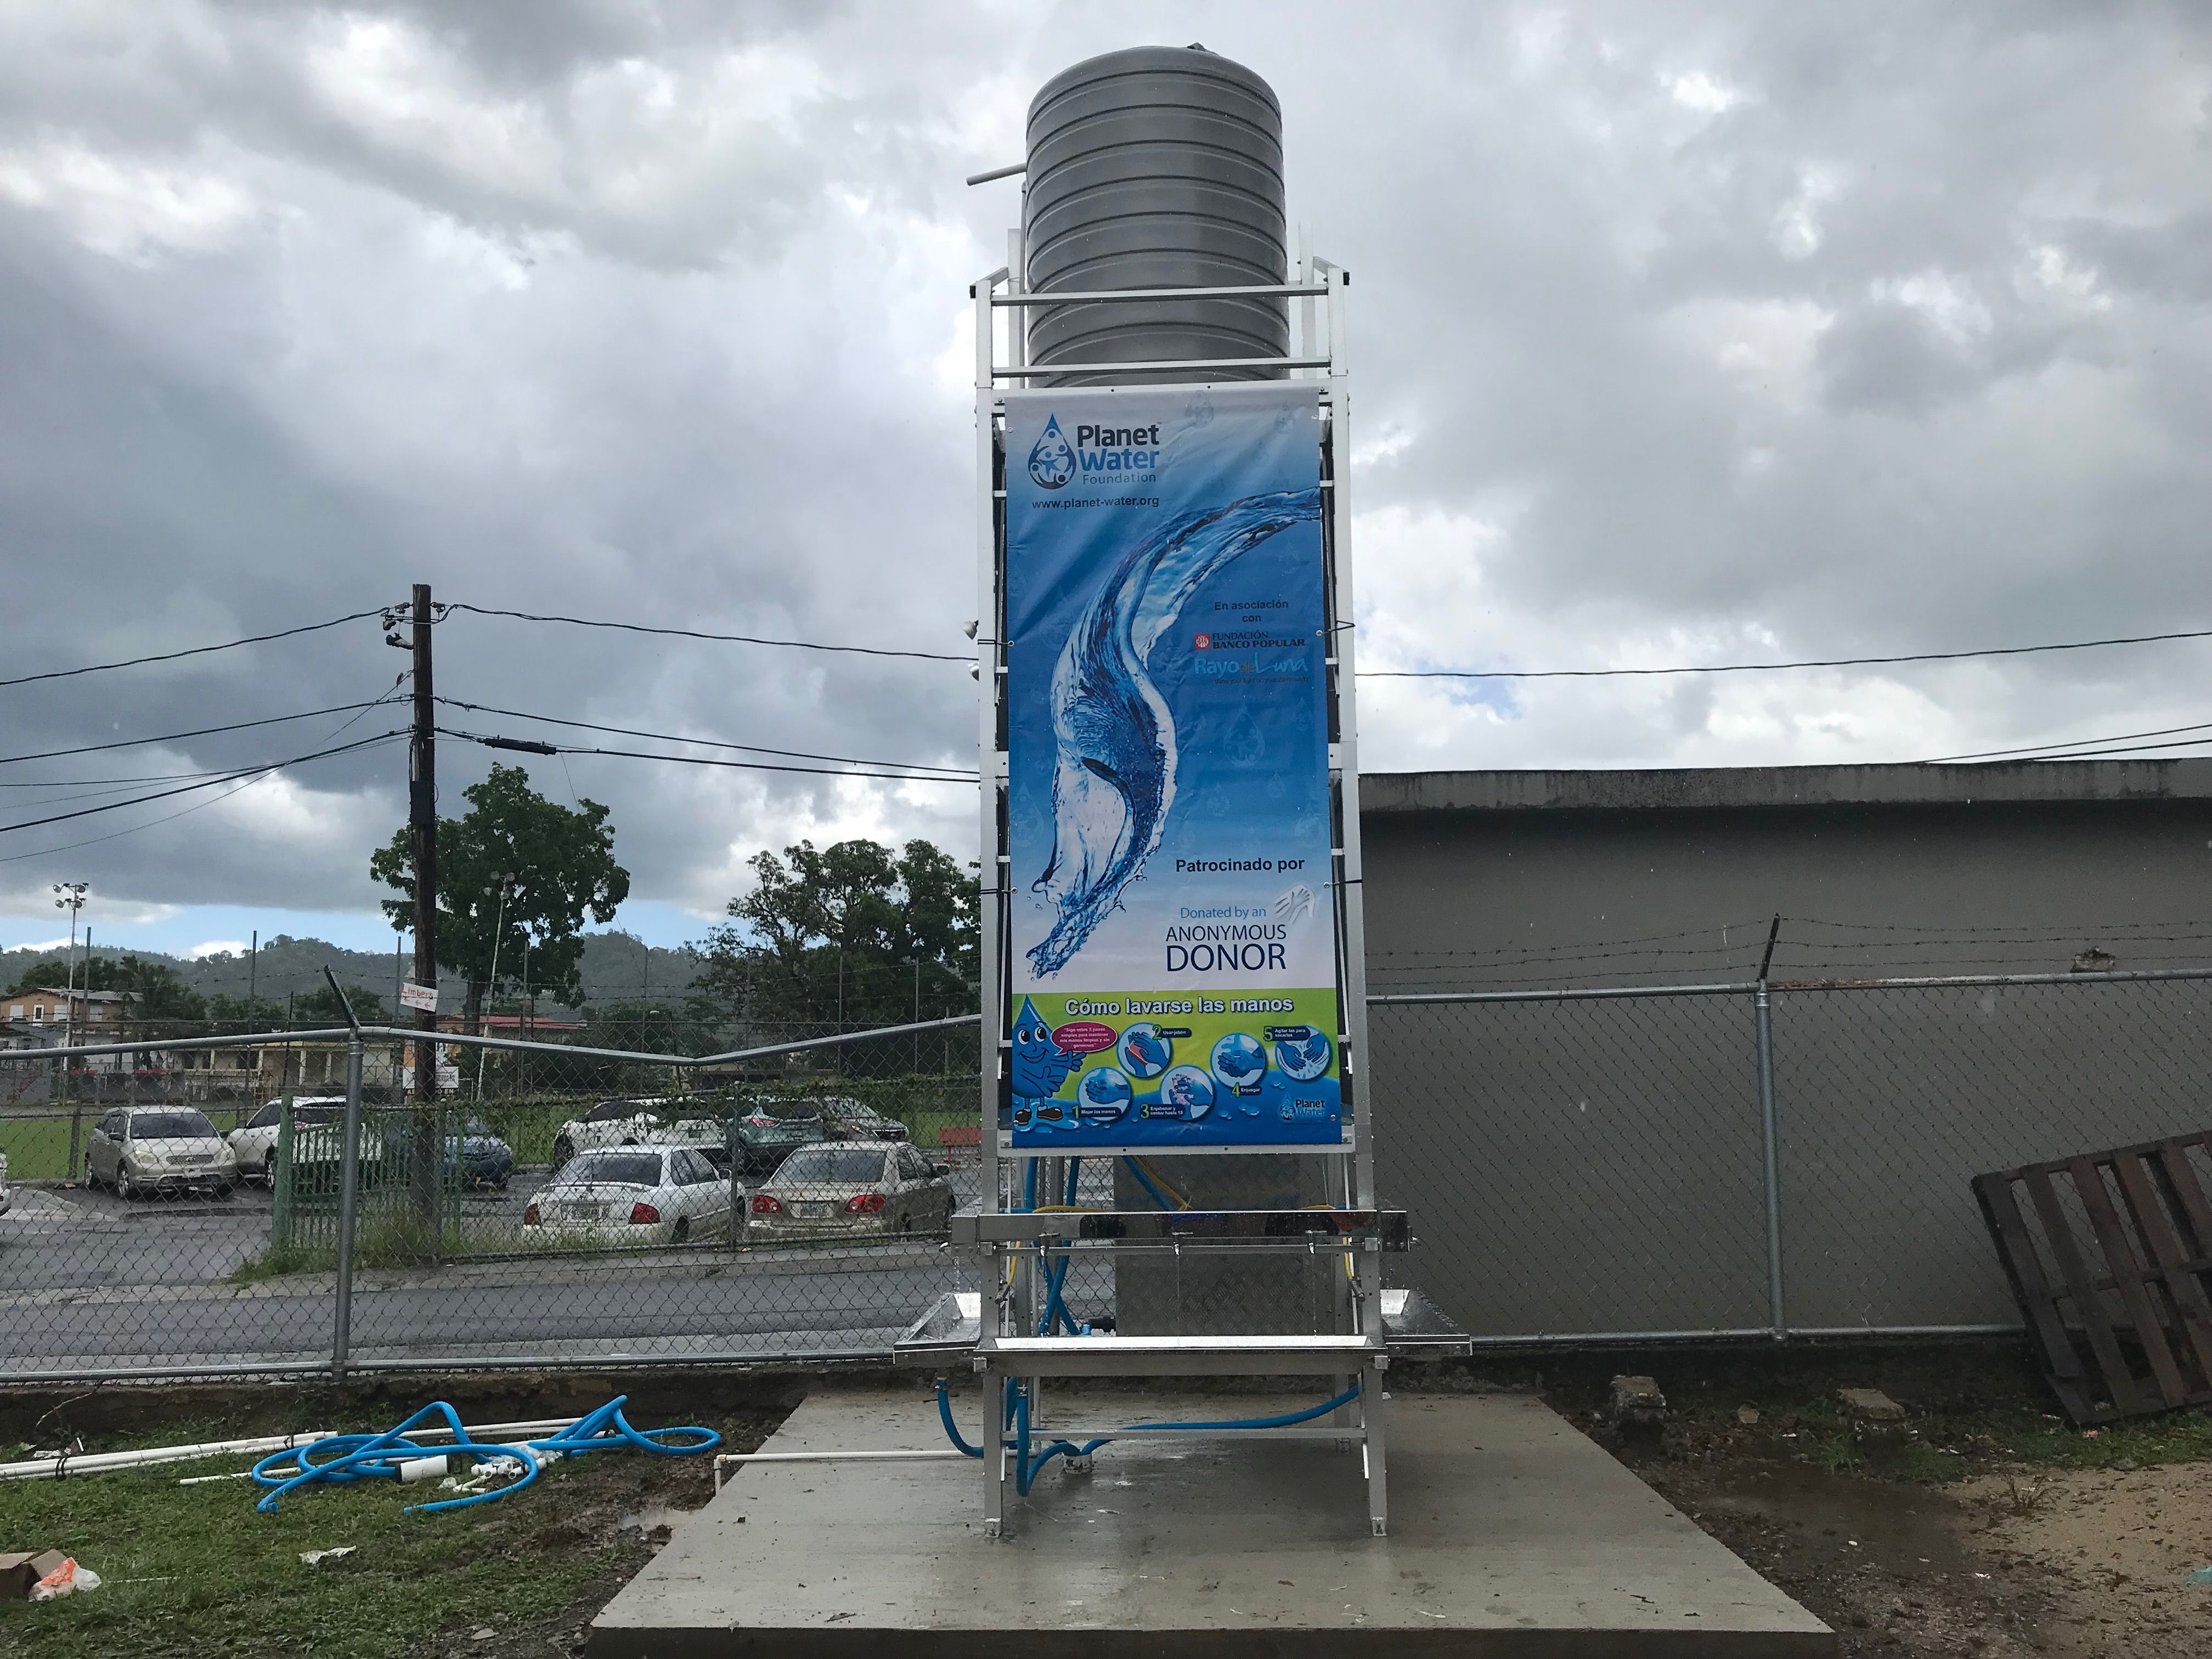 The water tower, provided by the Planet Water Foundation, is capable of supplying 1,000 residents with drinkable water daily. Rayo De Luna has installed 36 towers around the island. Image by Tomas Woodall Posada. United States, 2018.